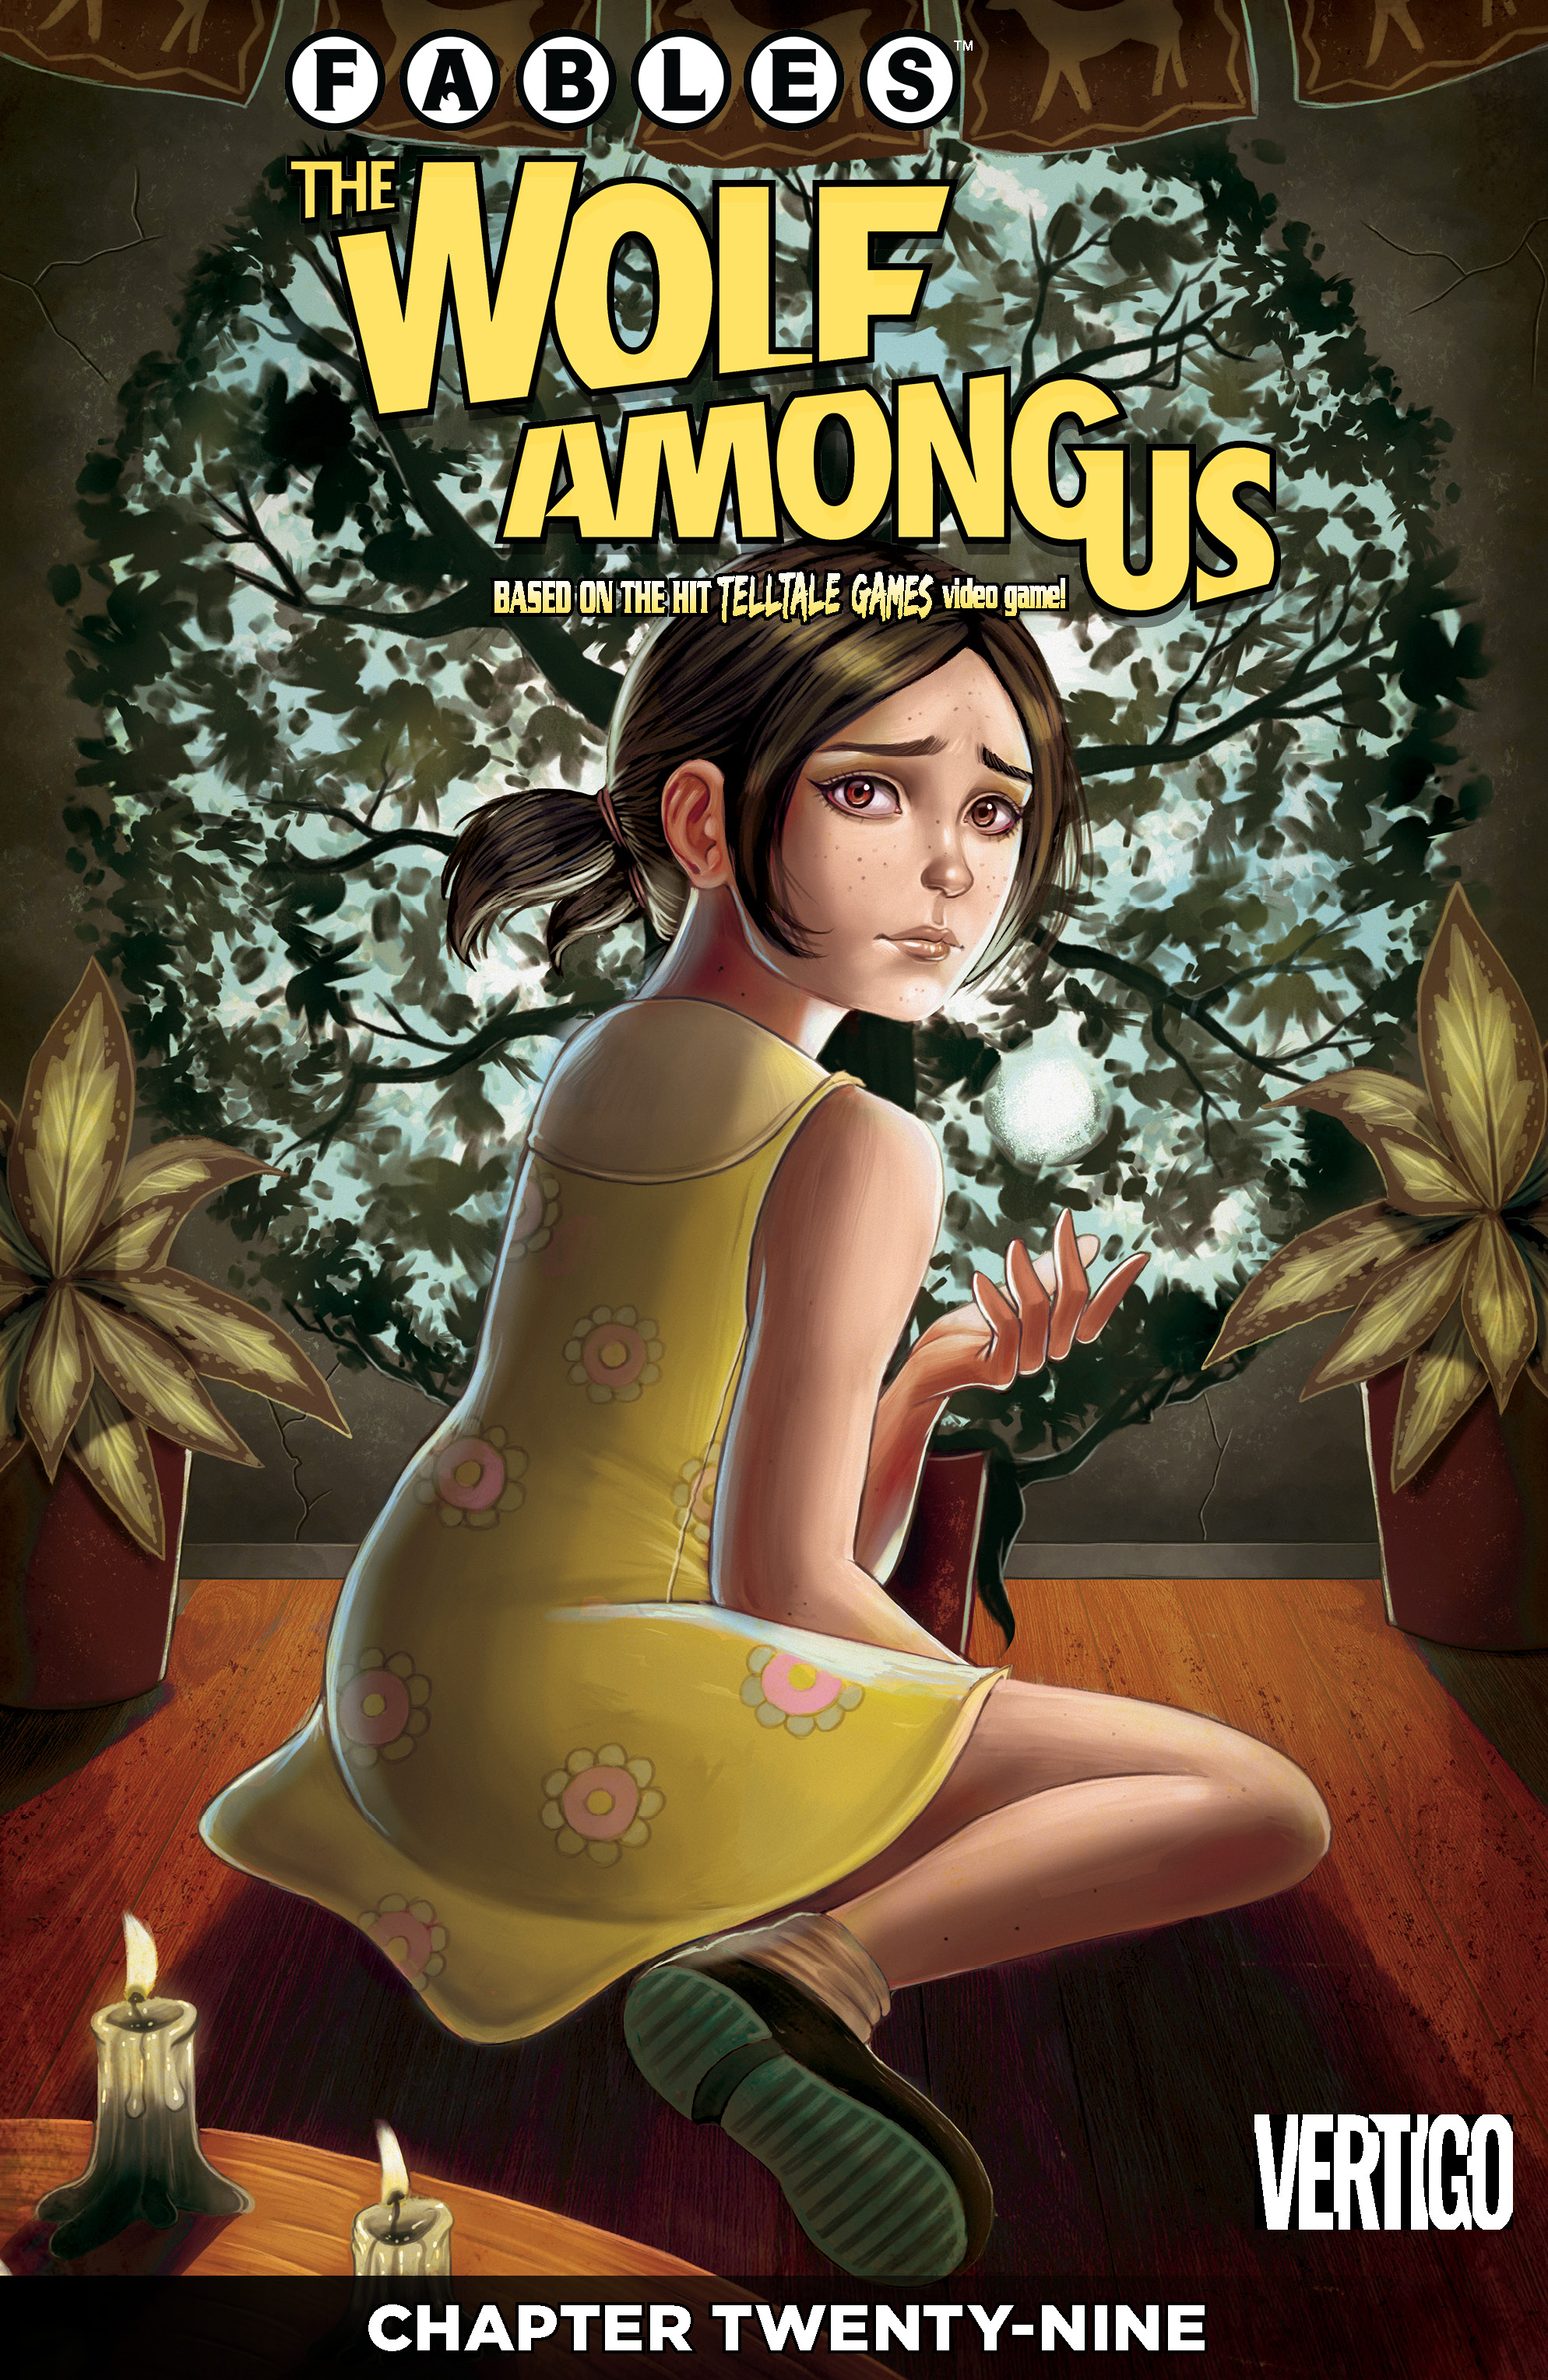 Fables: The Wolf Among Us #29 preview images